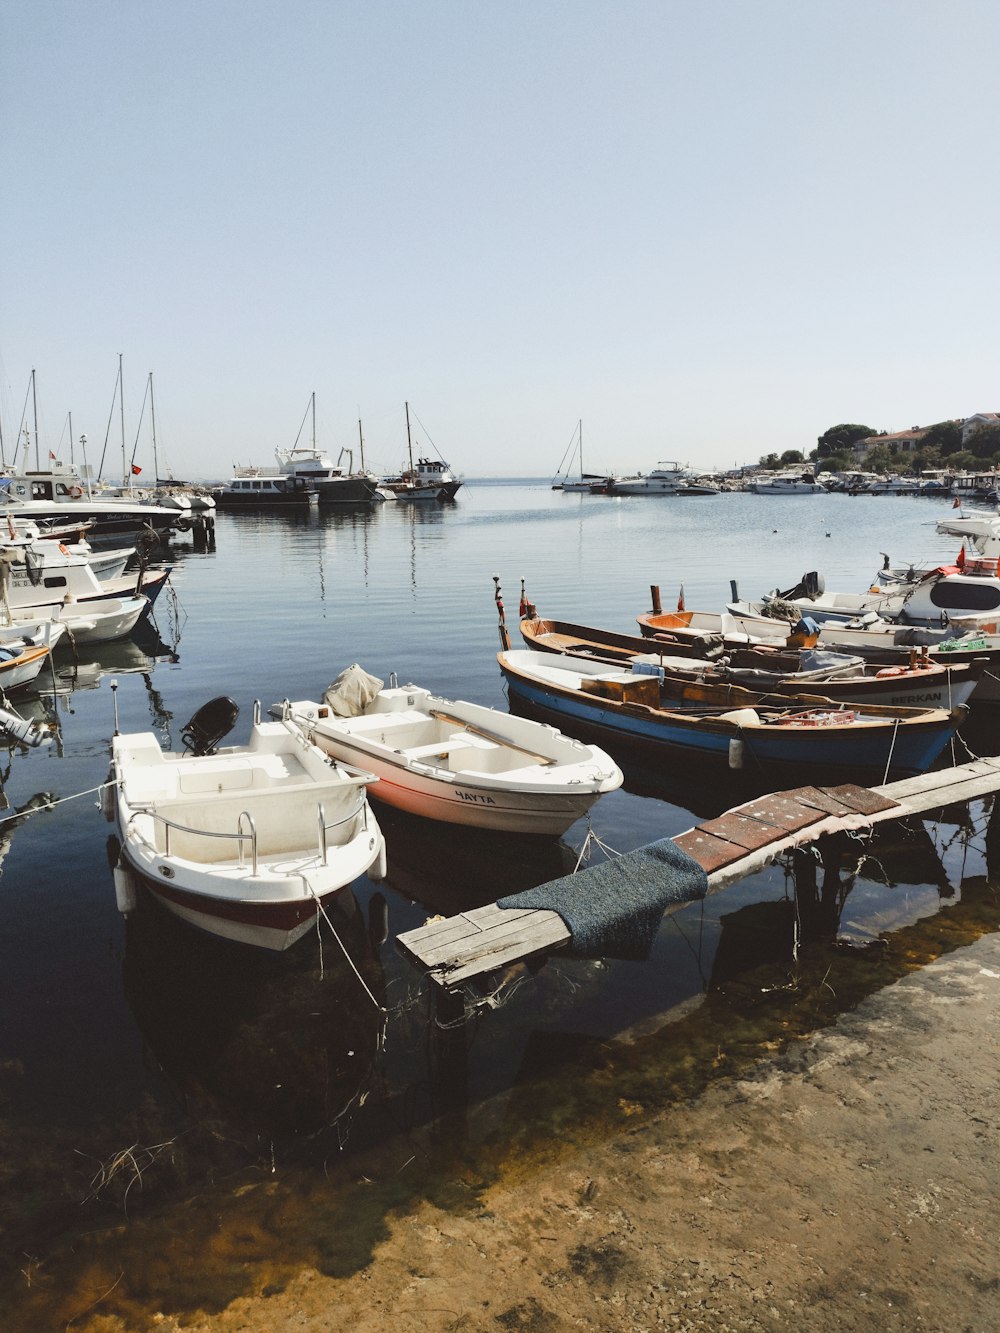 boats docked at a pier